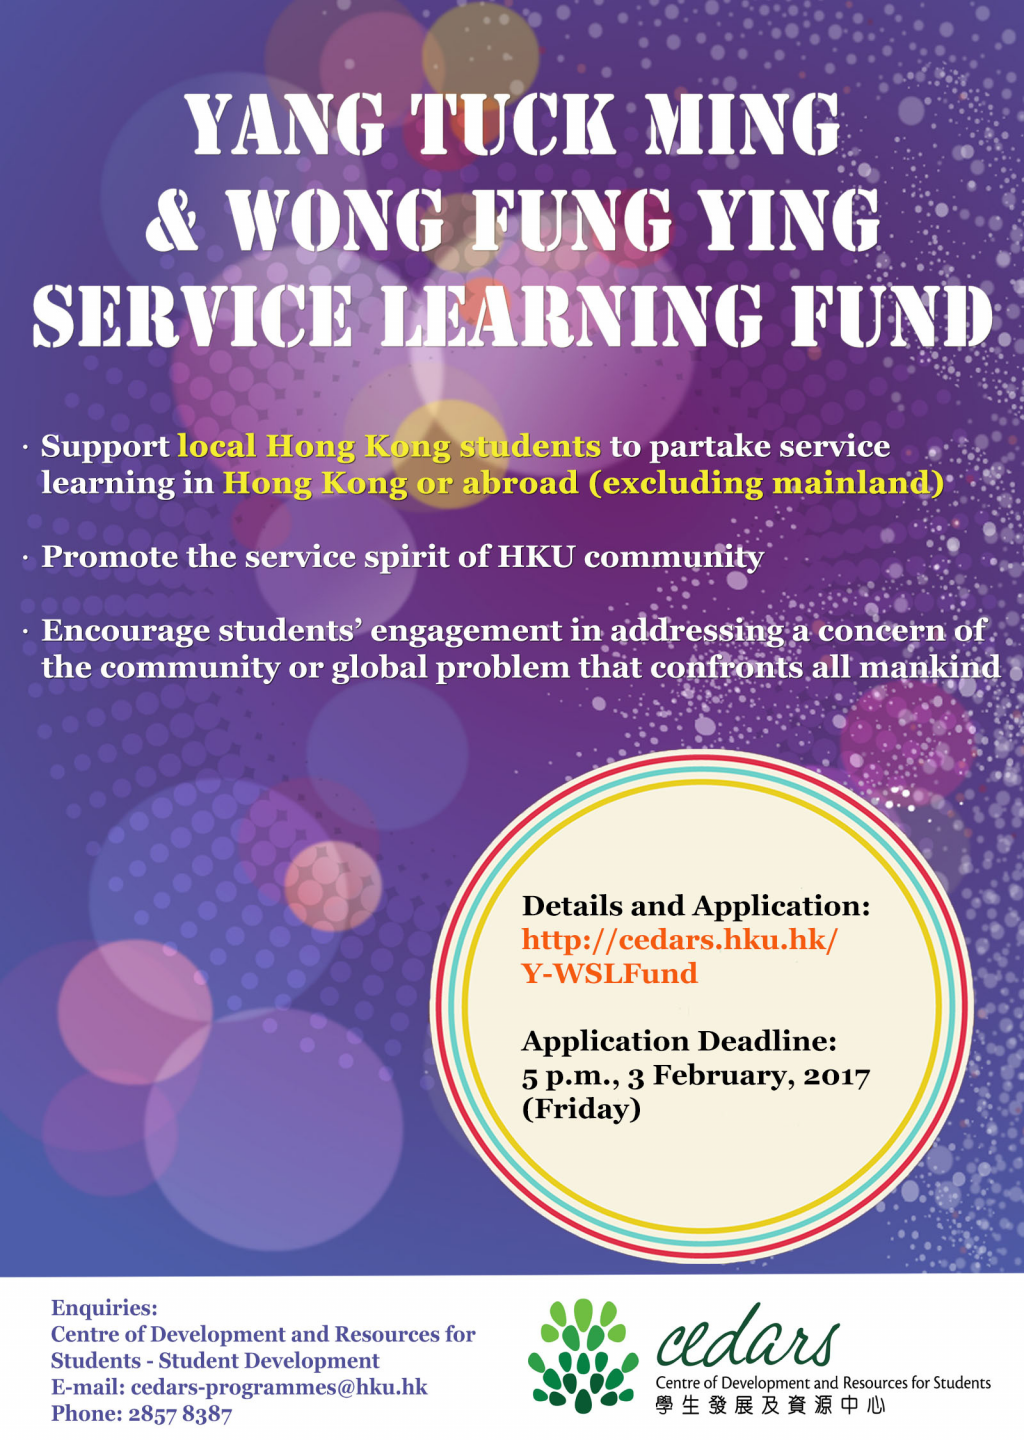 Yang Tuck Ming & Wong Fung Ying Service Learning Fund opens for application (Deadline: 3 Feb)